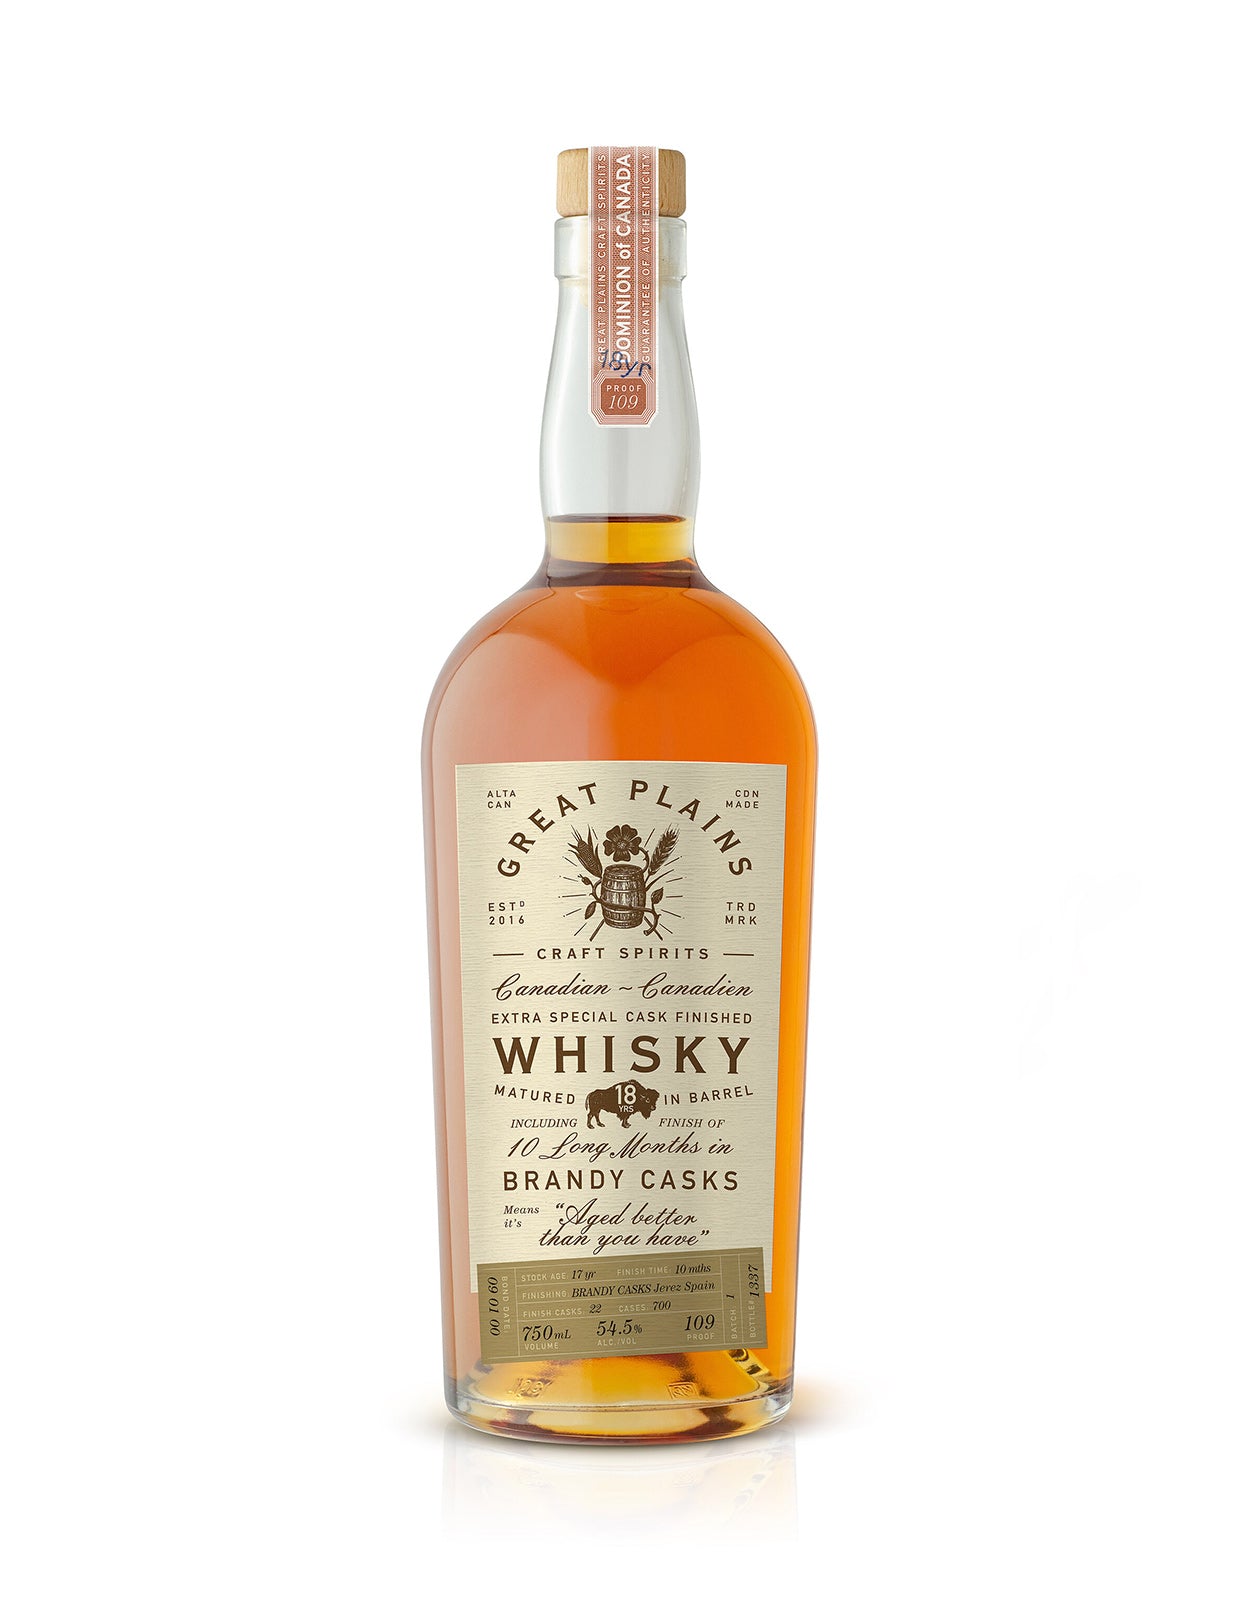 Great Plains Brandy Cask Finish 18 Year Old Whisky